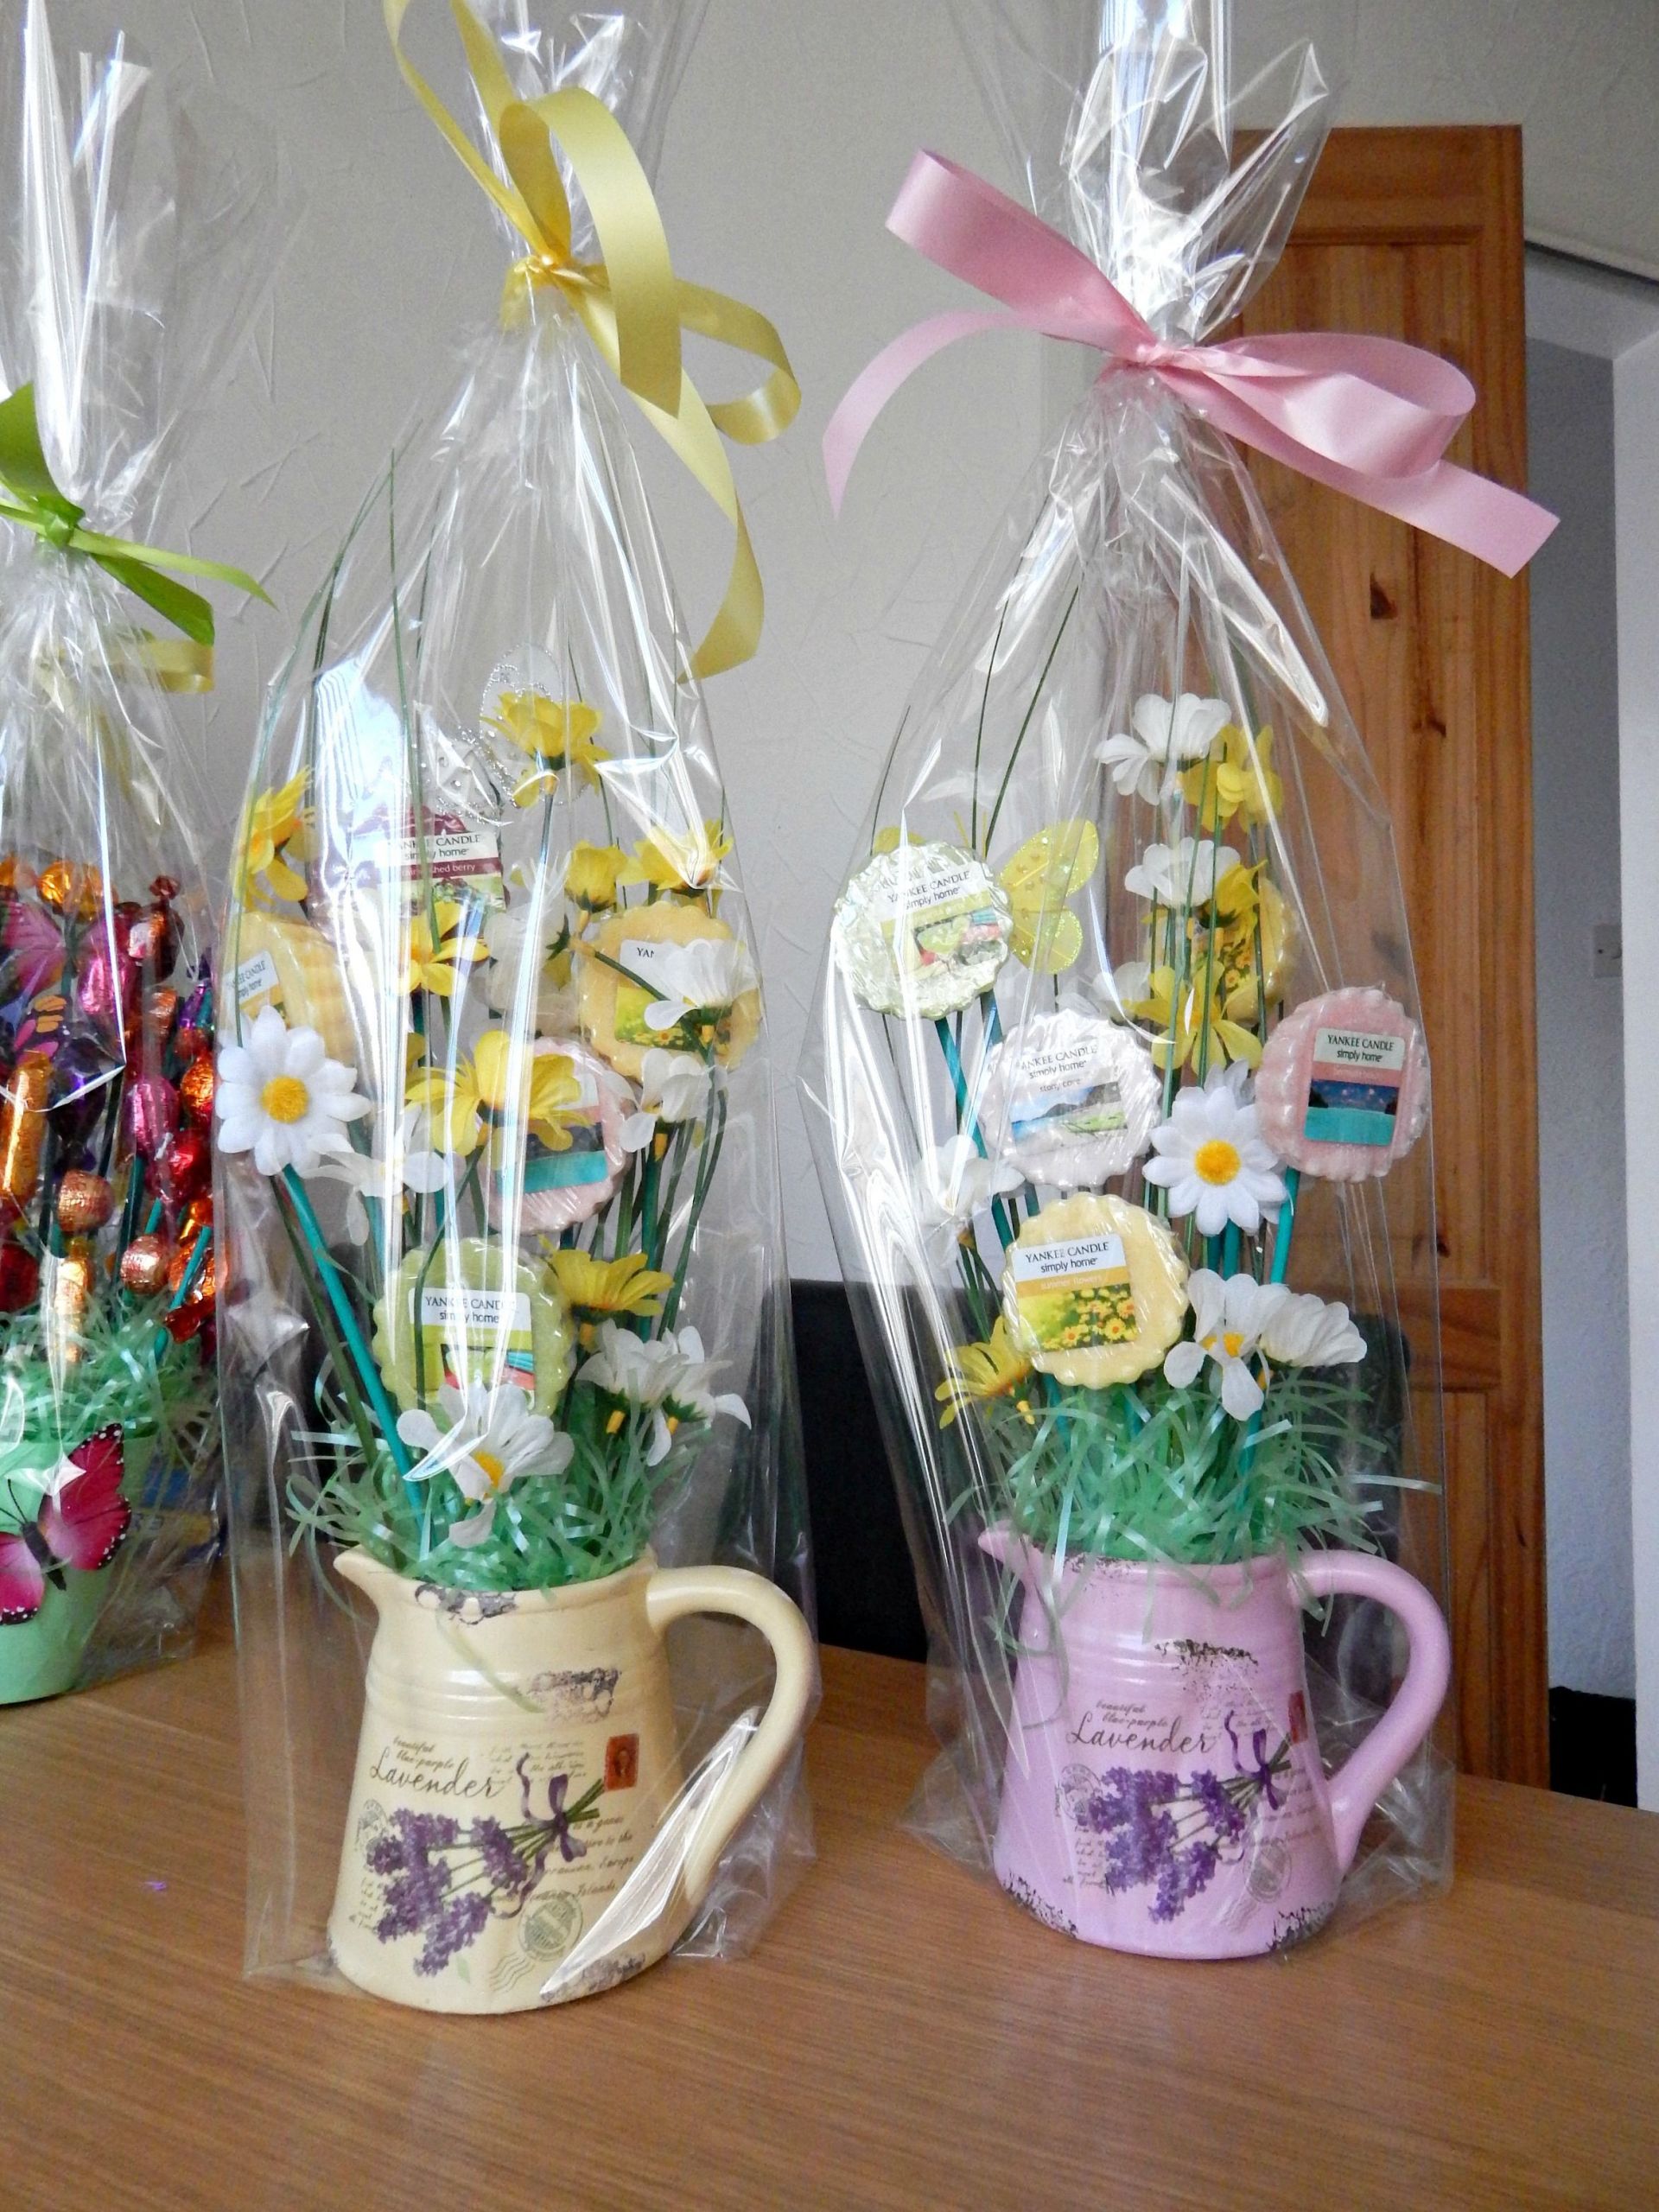 Candle Gift Basket Ideas
 Operating a Successful Candle Making Business